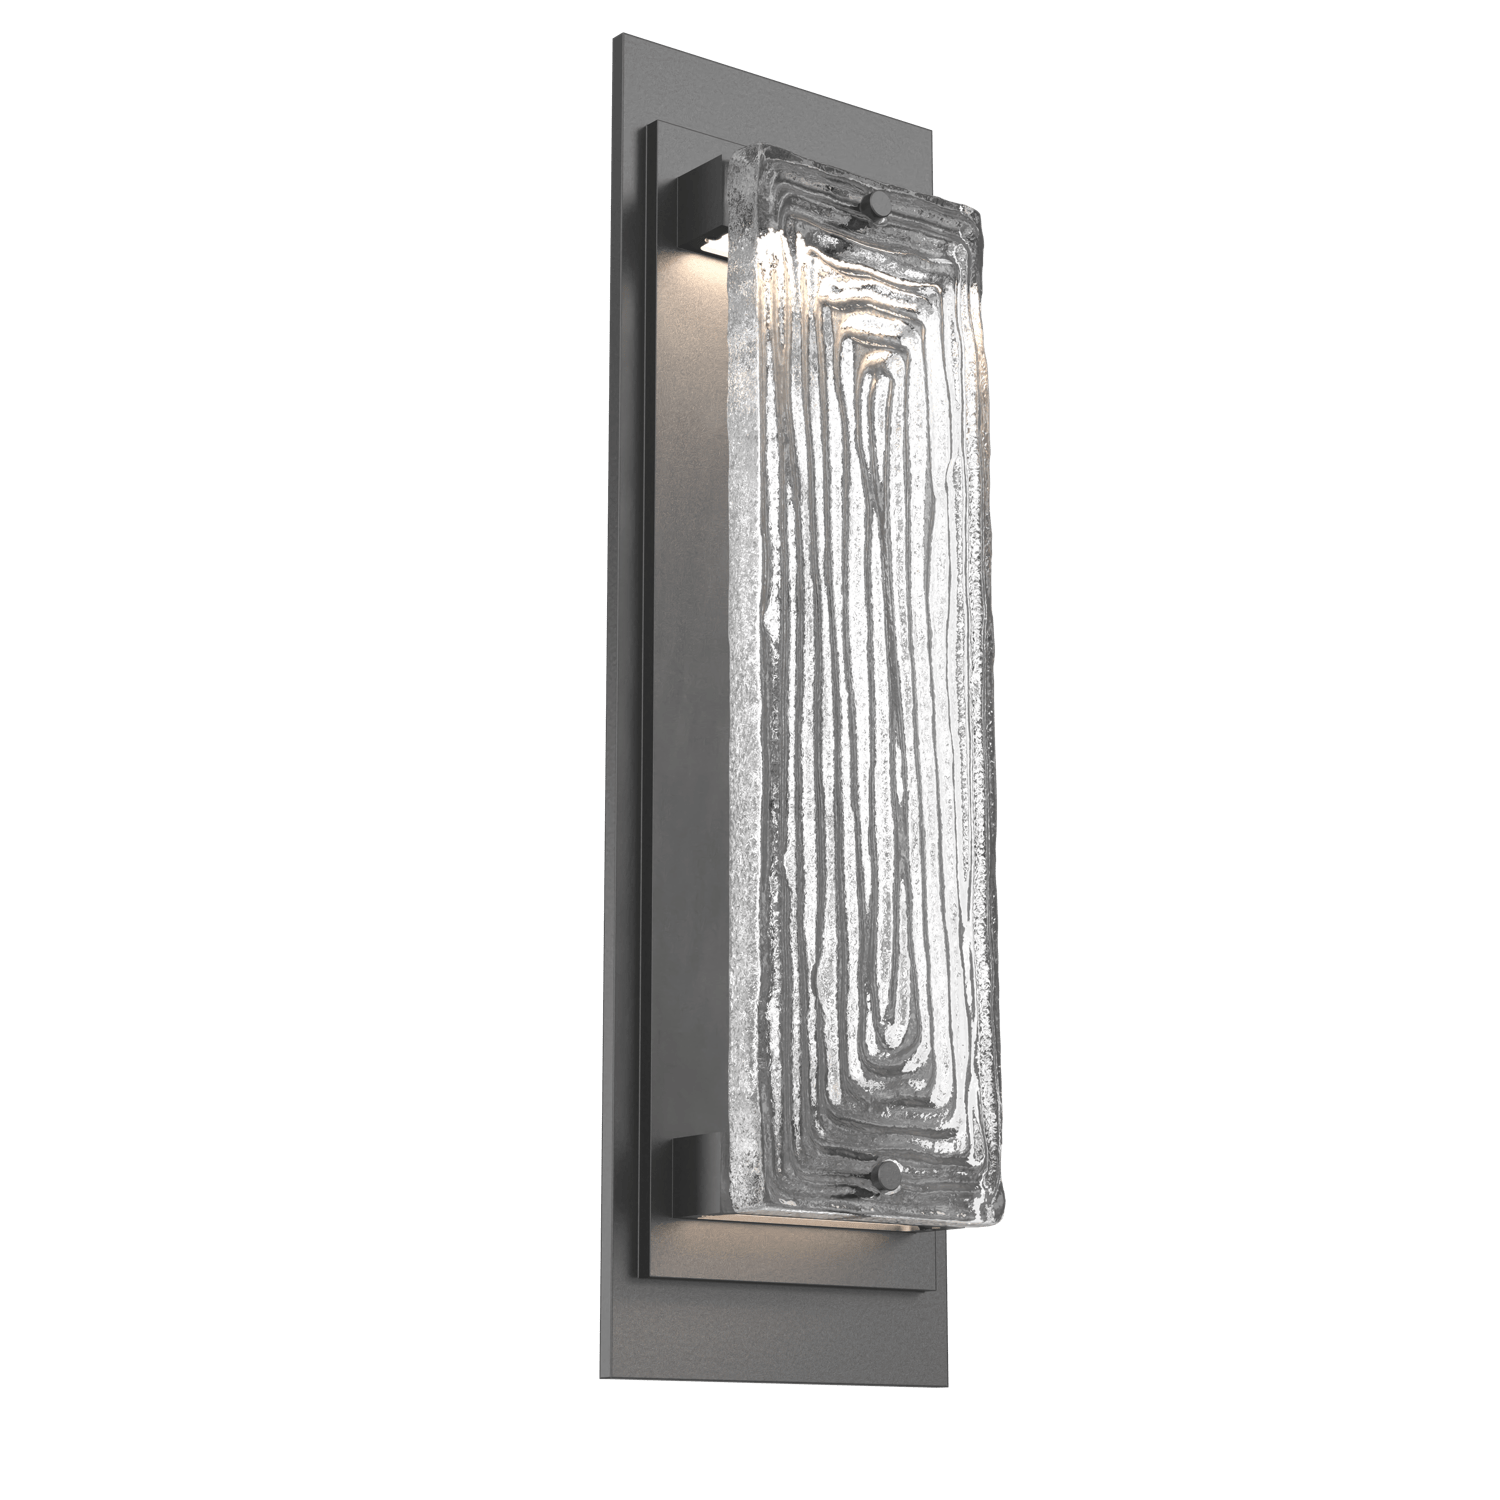 ODB0090-01-AG-TL-Hammerton-Studio-Tabulo-22-inch-outdoor-sconce-with-argento-grey-finish-and-clear-linea-cast-glass-shade-and-LED-lamping